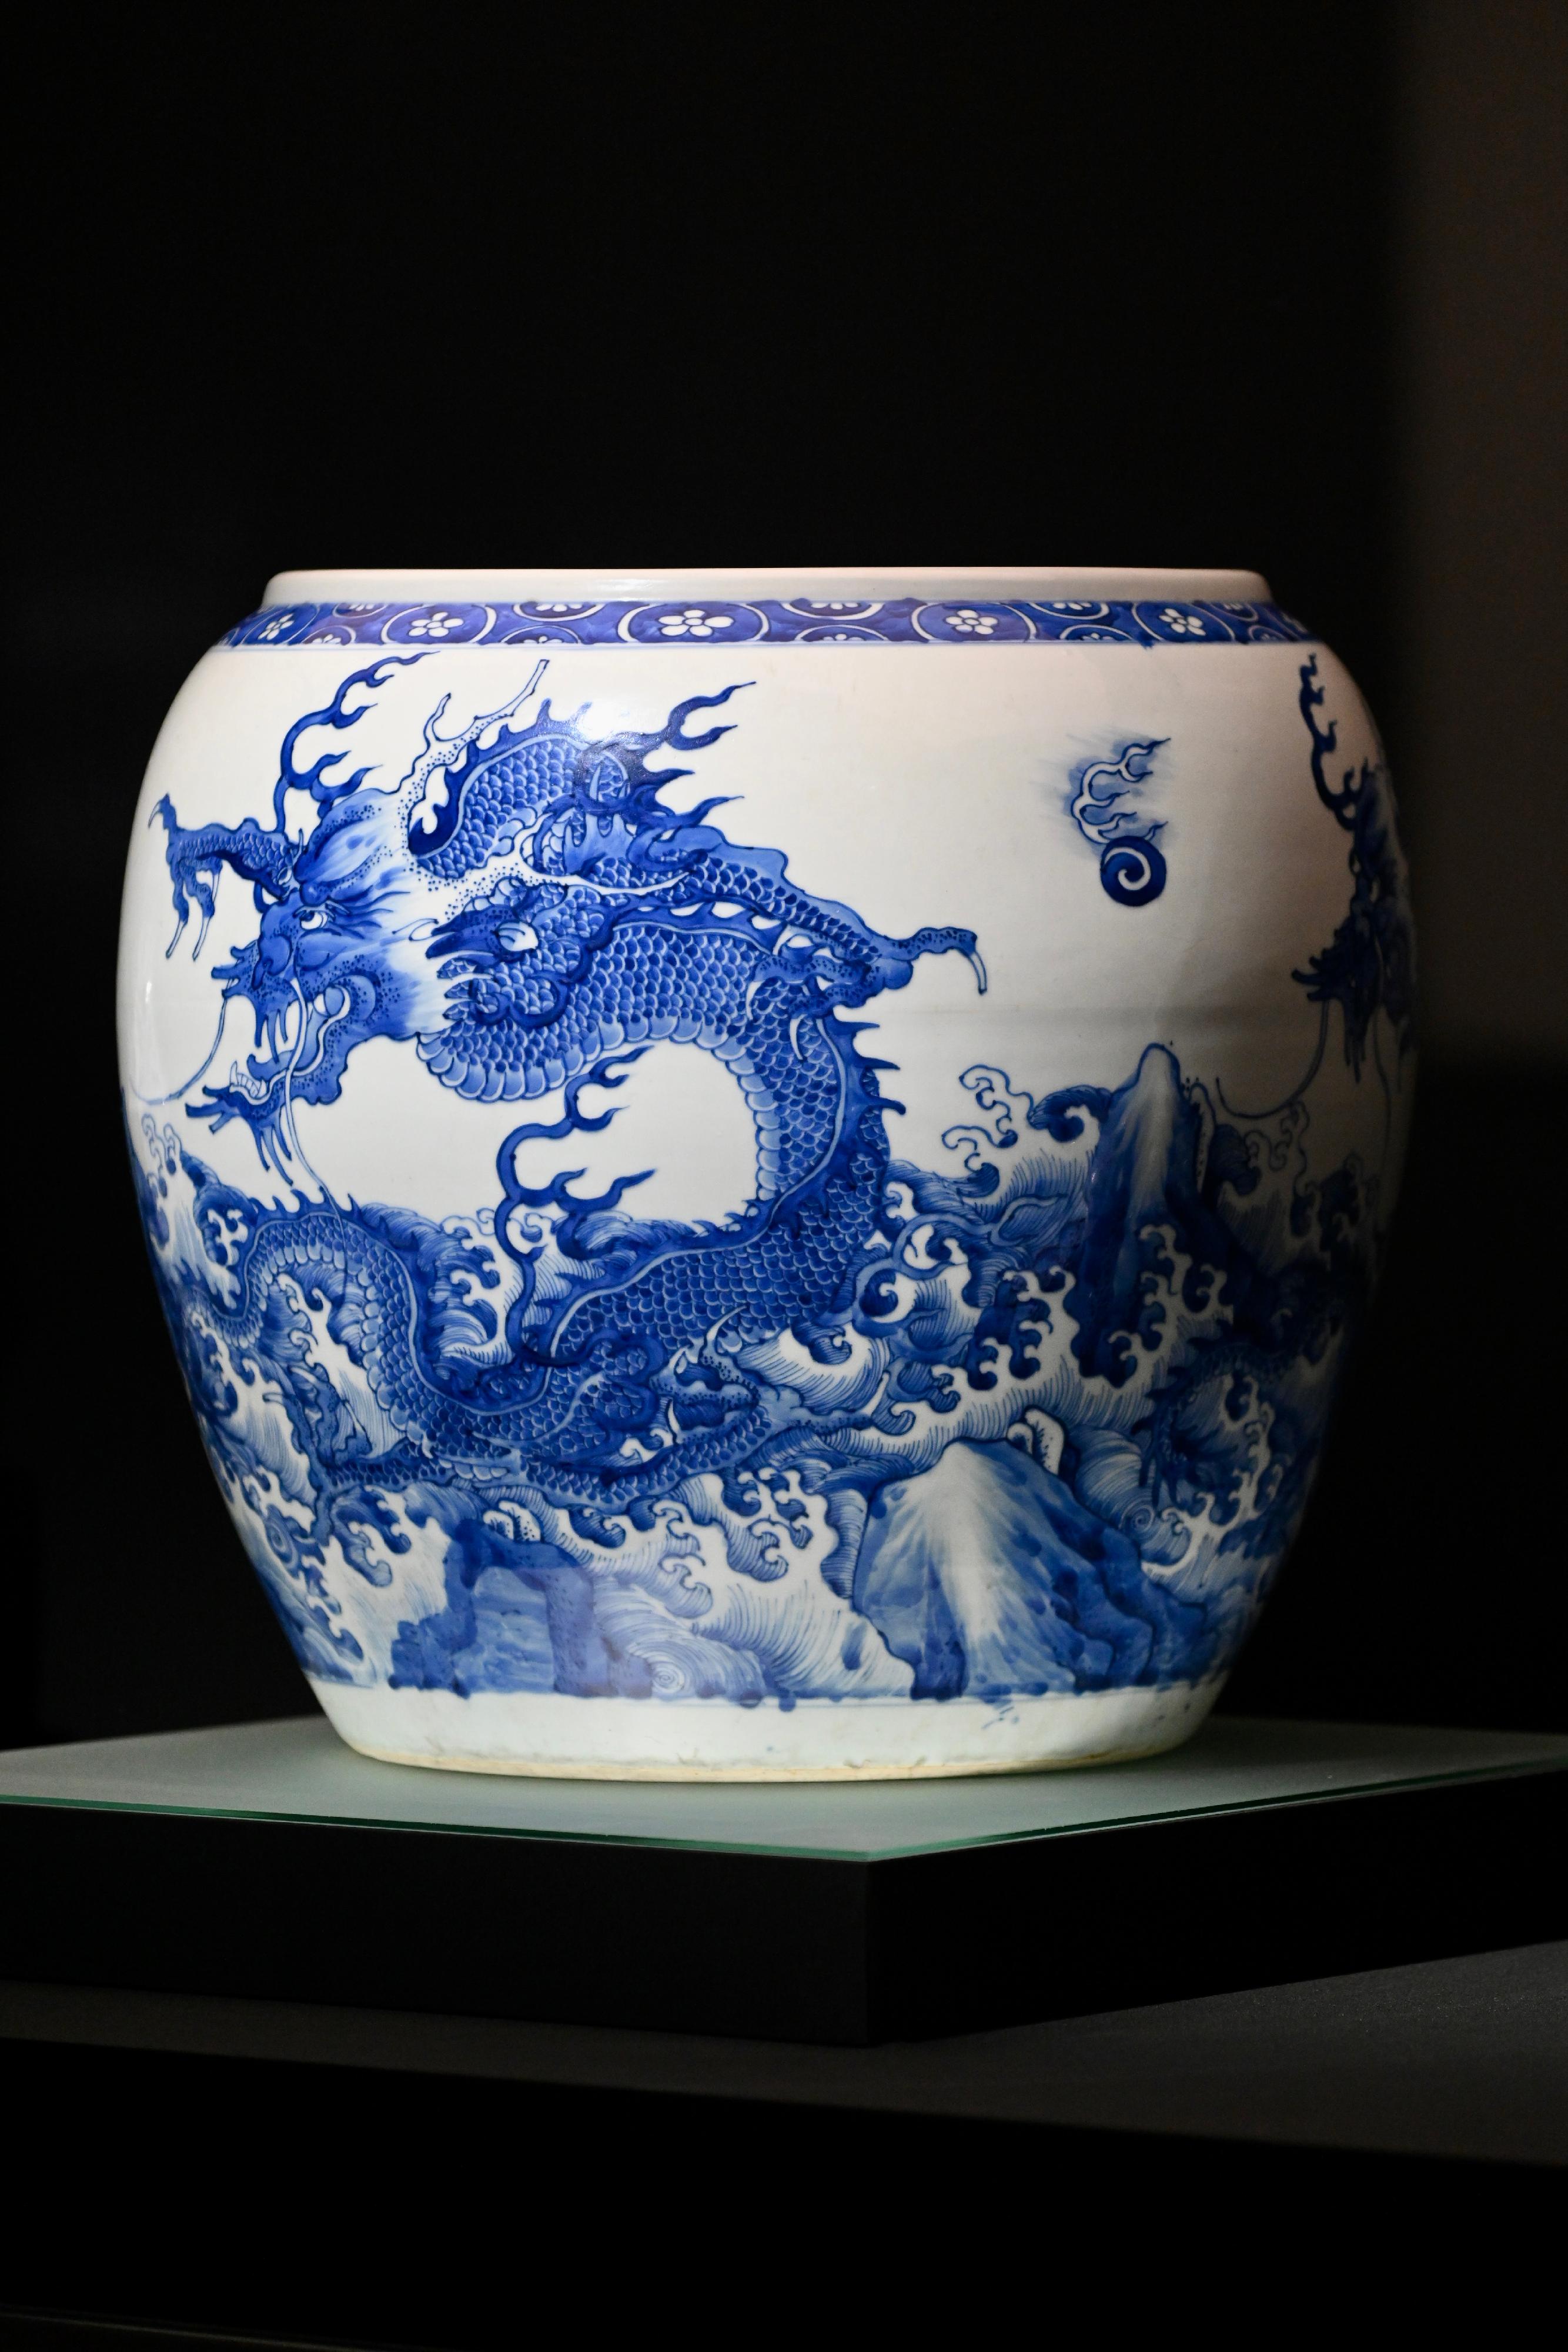 "Art Personalised: Masterpieces from the Hong Kong Museum of Art" exhibition will be held at the Hong Kong Museum of Art from tomorrow (June 30). Picture shows a jar with dragons amid wave design in underglaze blue from Kangxi period in the Qing dynasty, which is on display in the "Perfectionist" exhibition zone.

